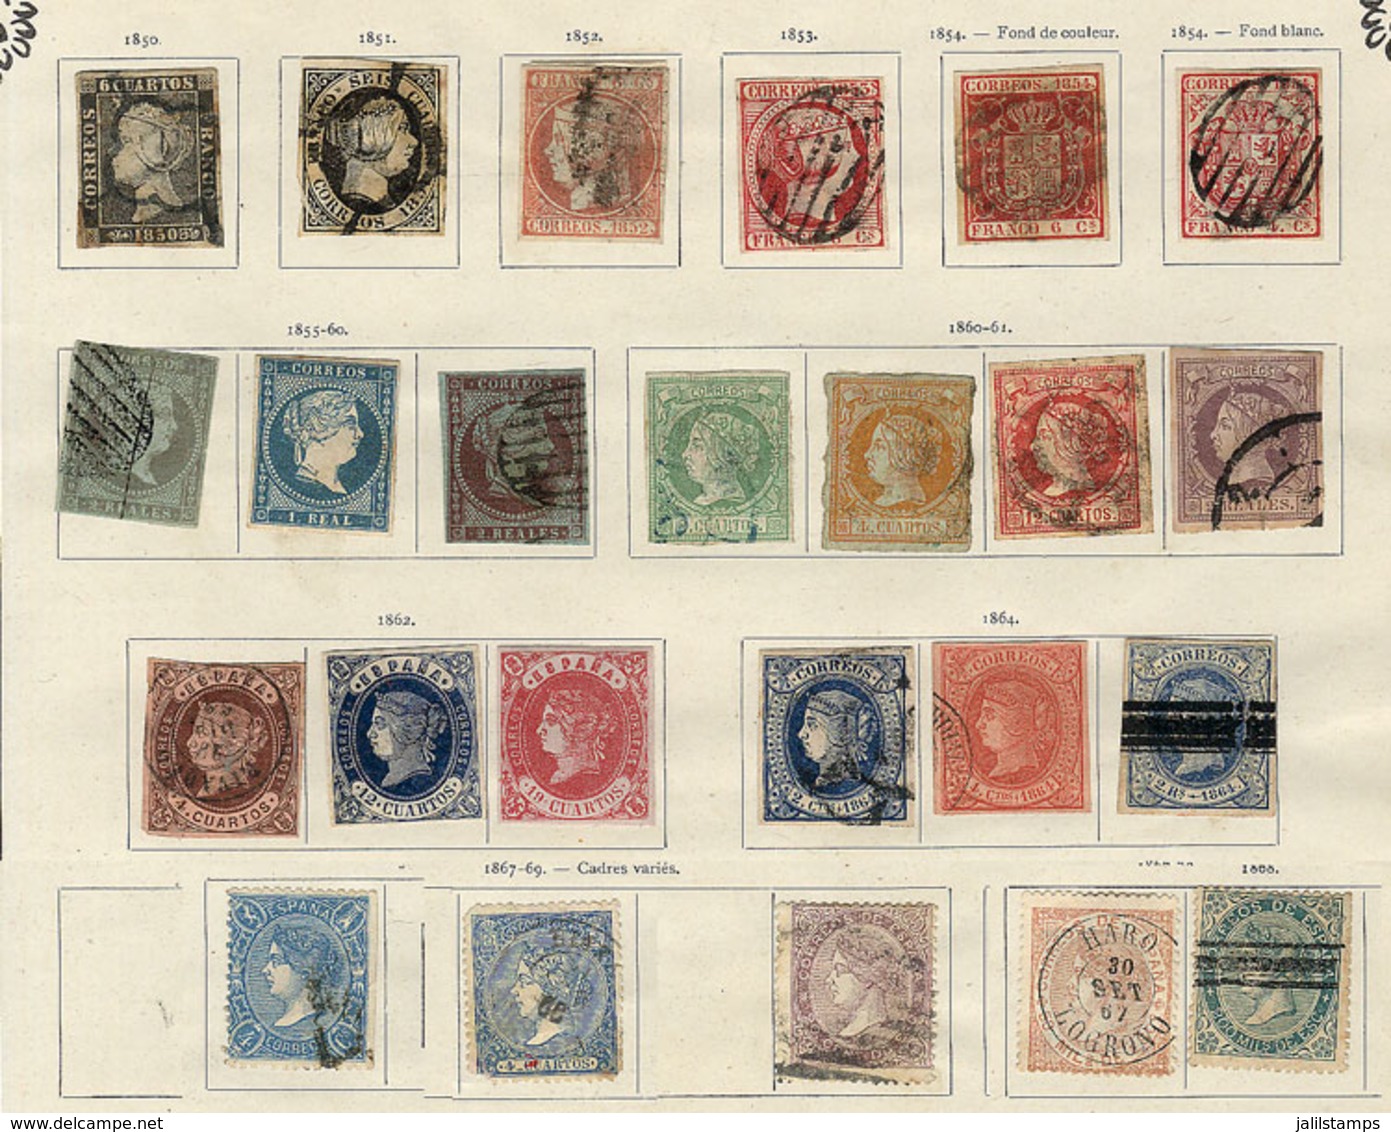 SPAIN: Old Collection On Album Pages, Used Or Mint Stamps, Fine General Quality (some May Have Defects), Good Opportunit - Verzamelingen